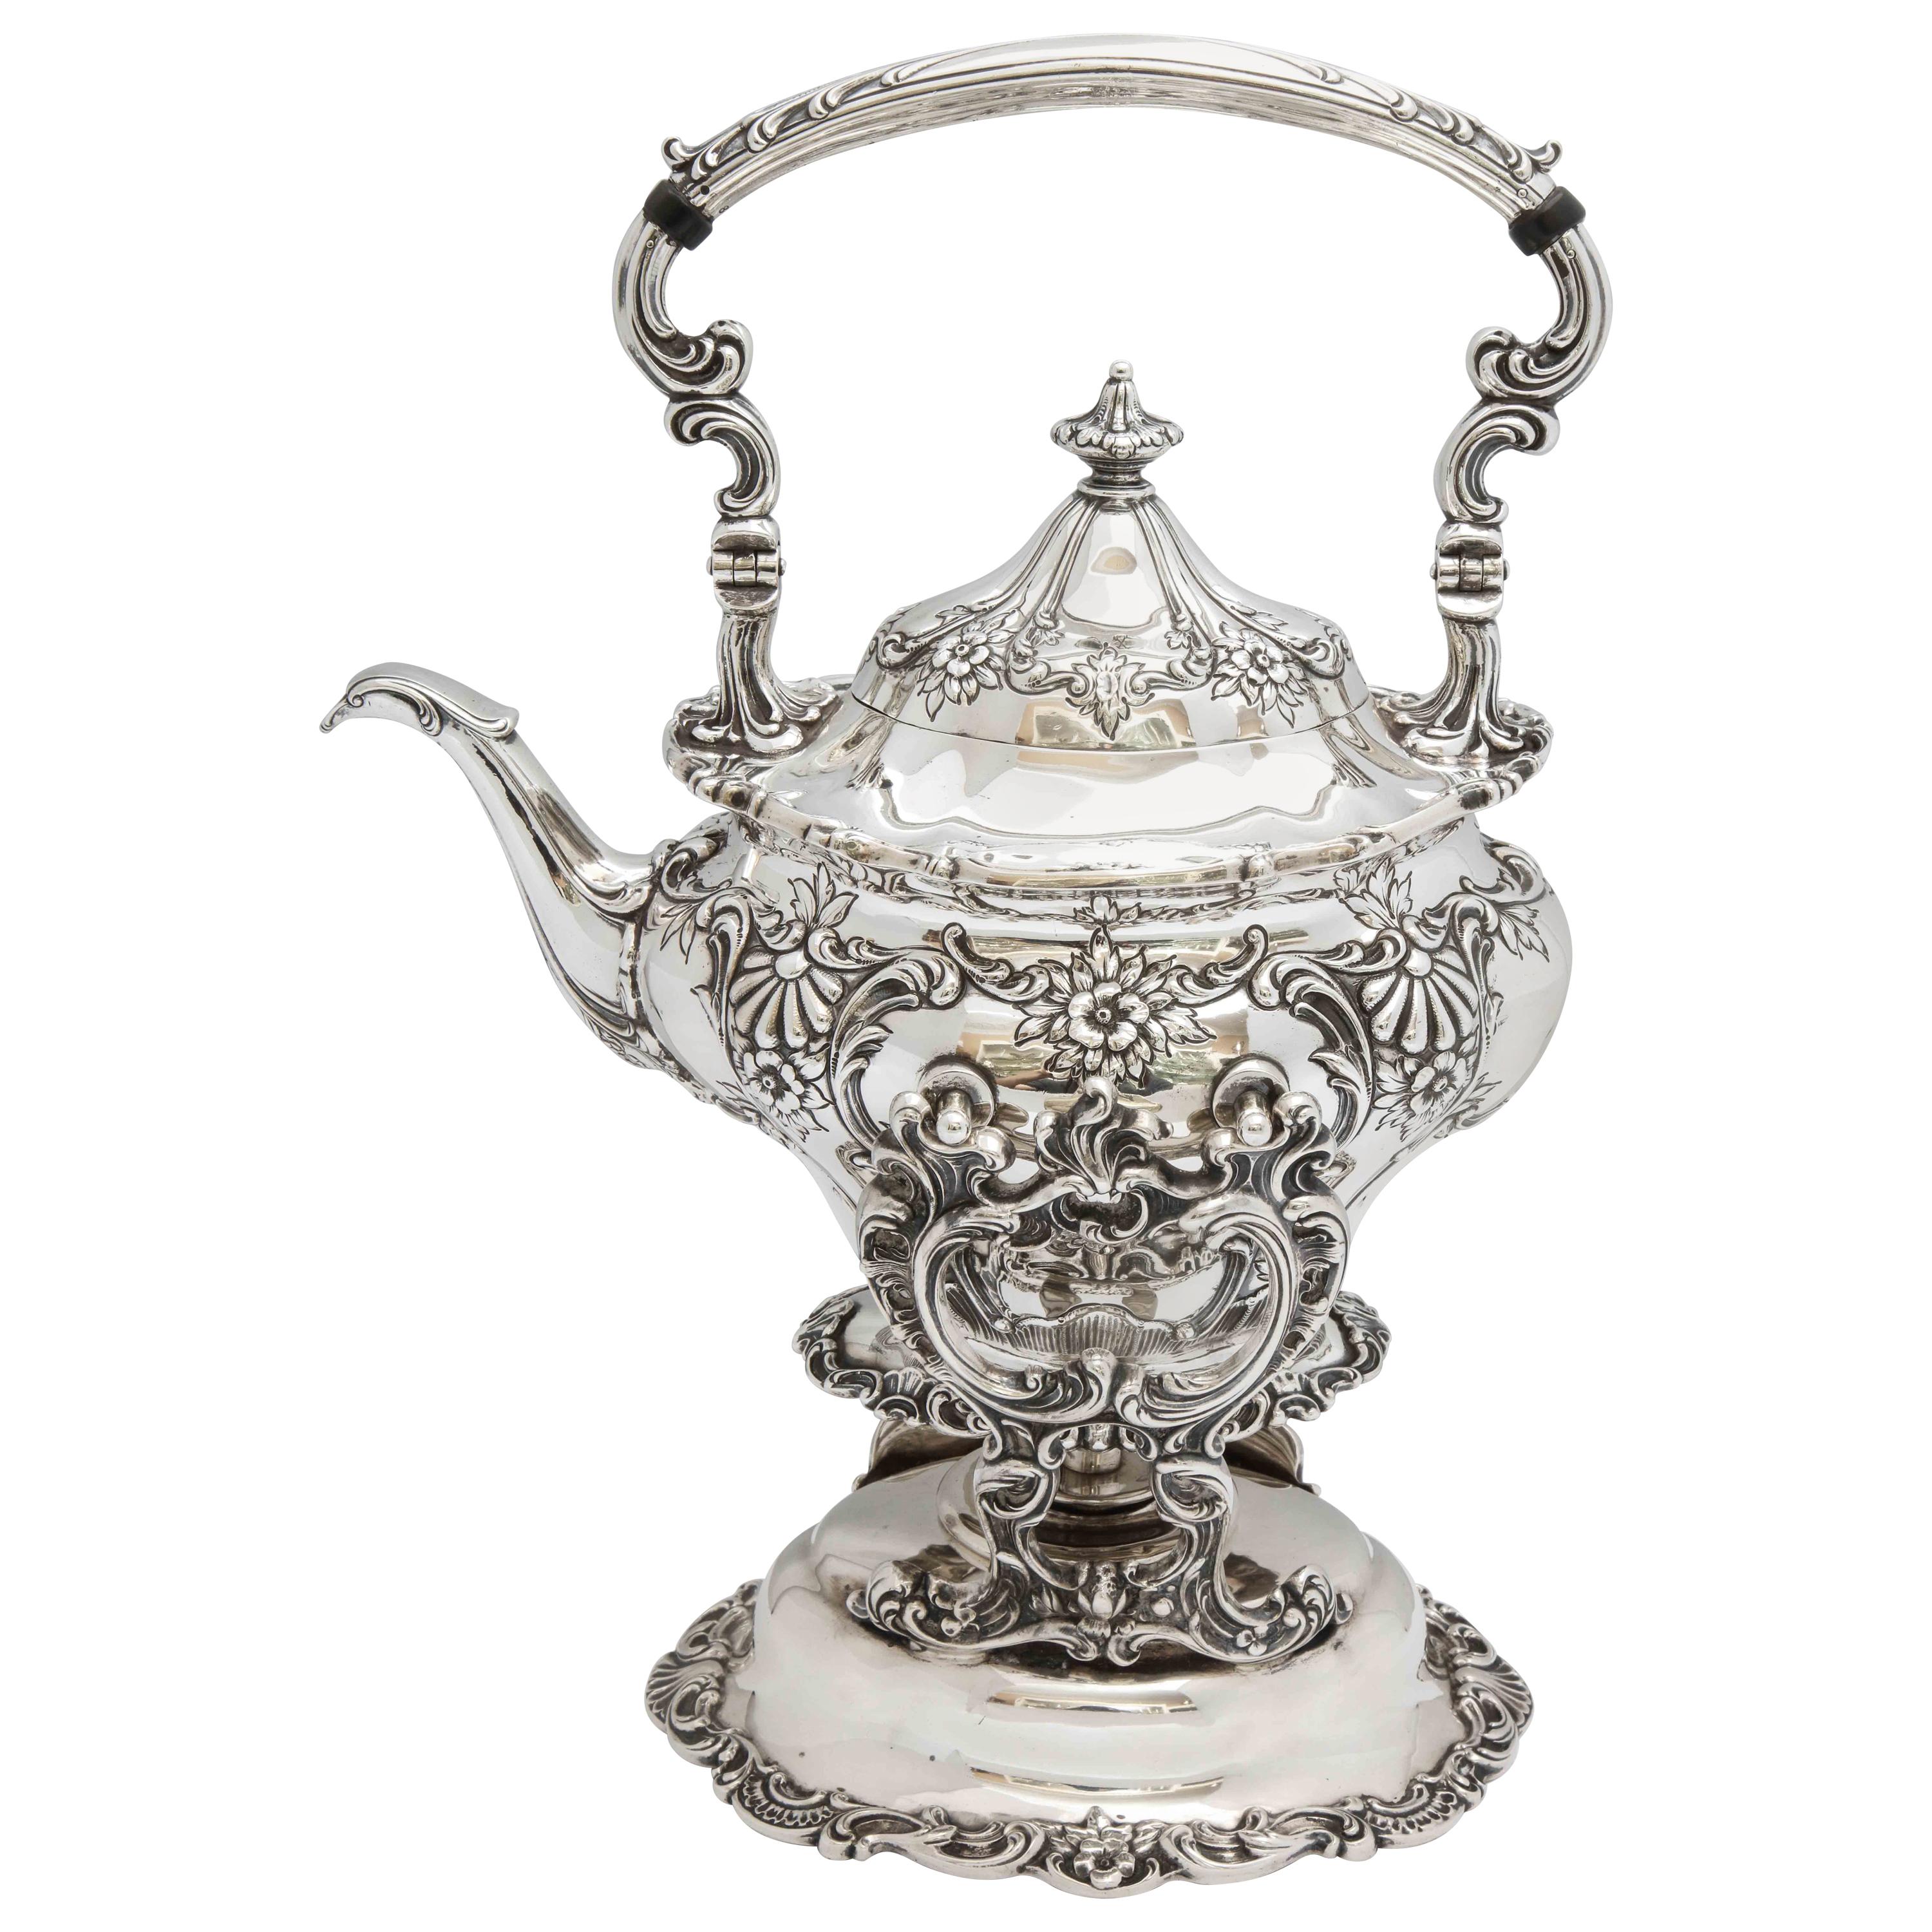 Victorian-Style Sterling Silver Tea Kettle on Stand by Gorham